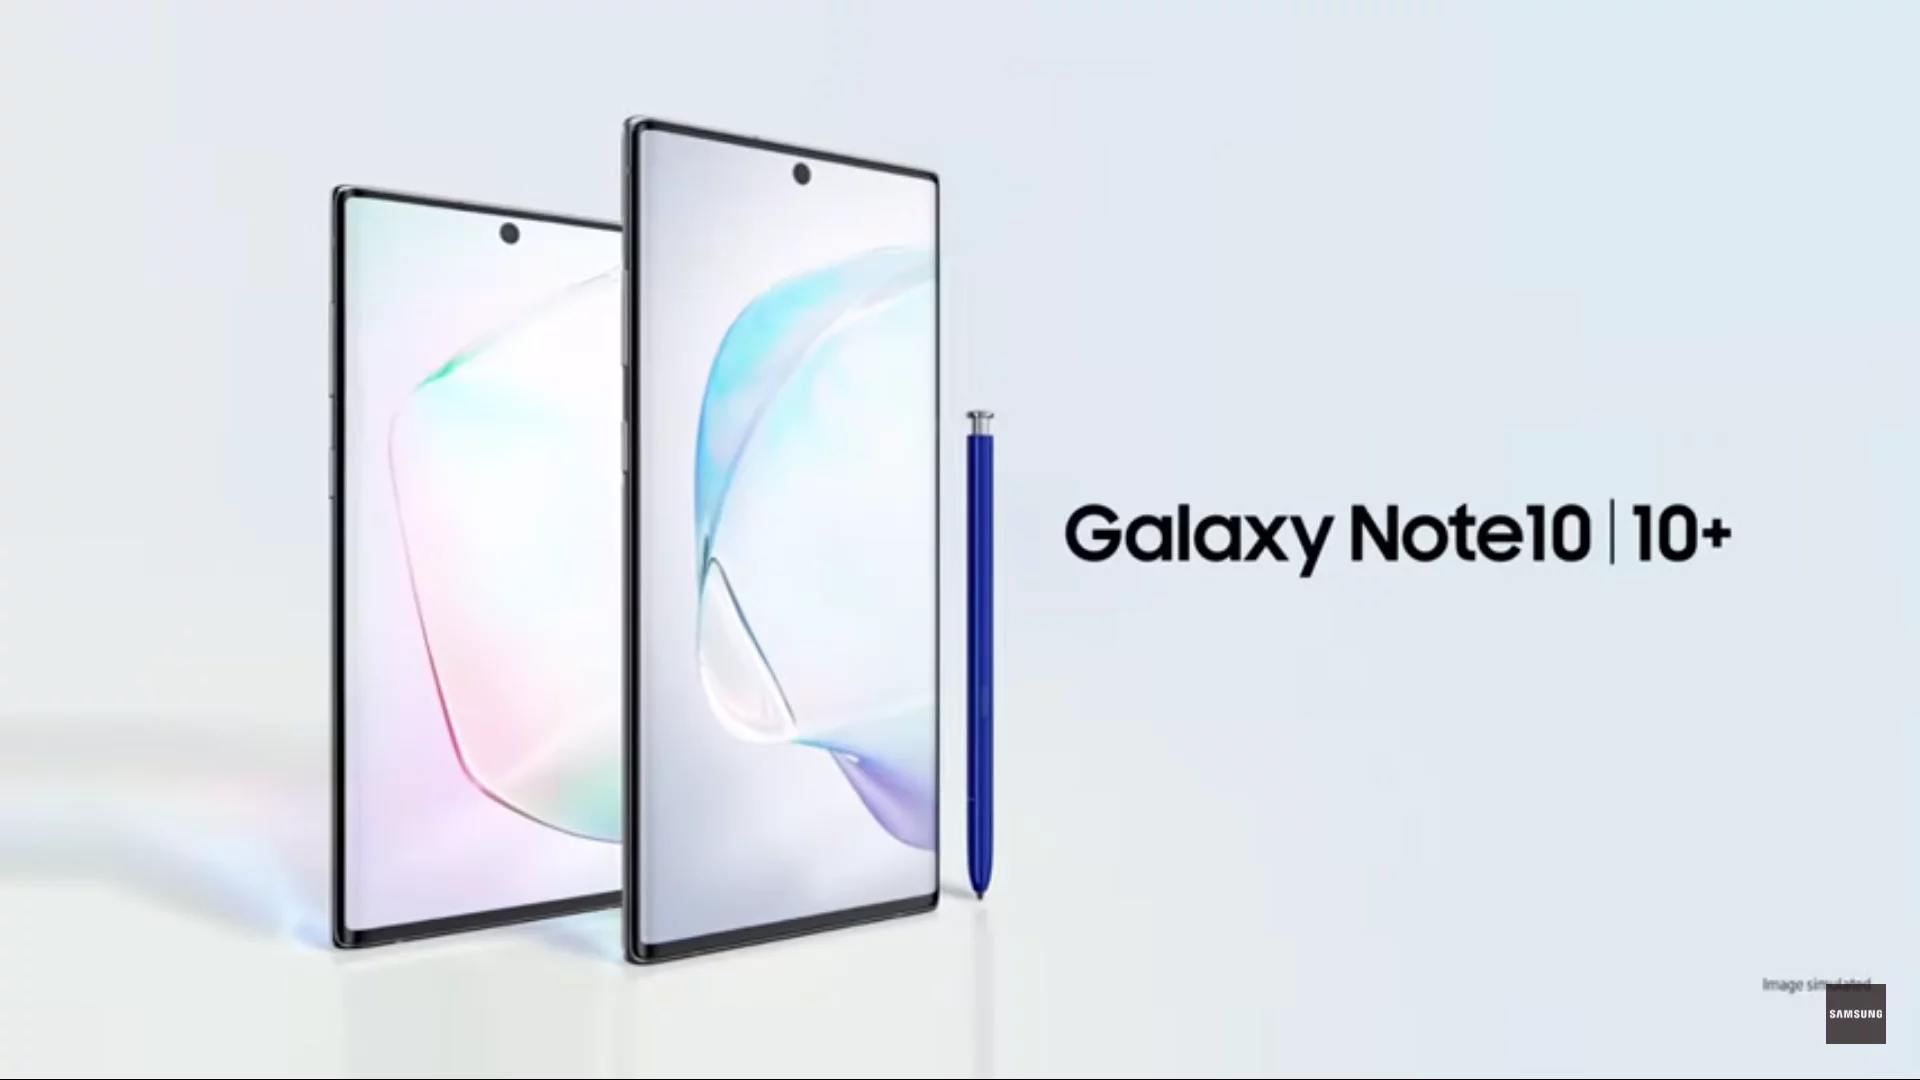 Samsung Galaxy Note10 Pro to have a 4,500 mAh battery - GSMArena